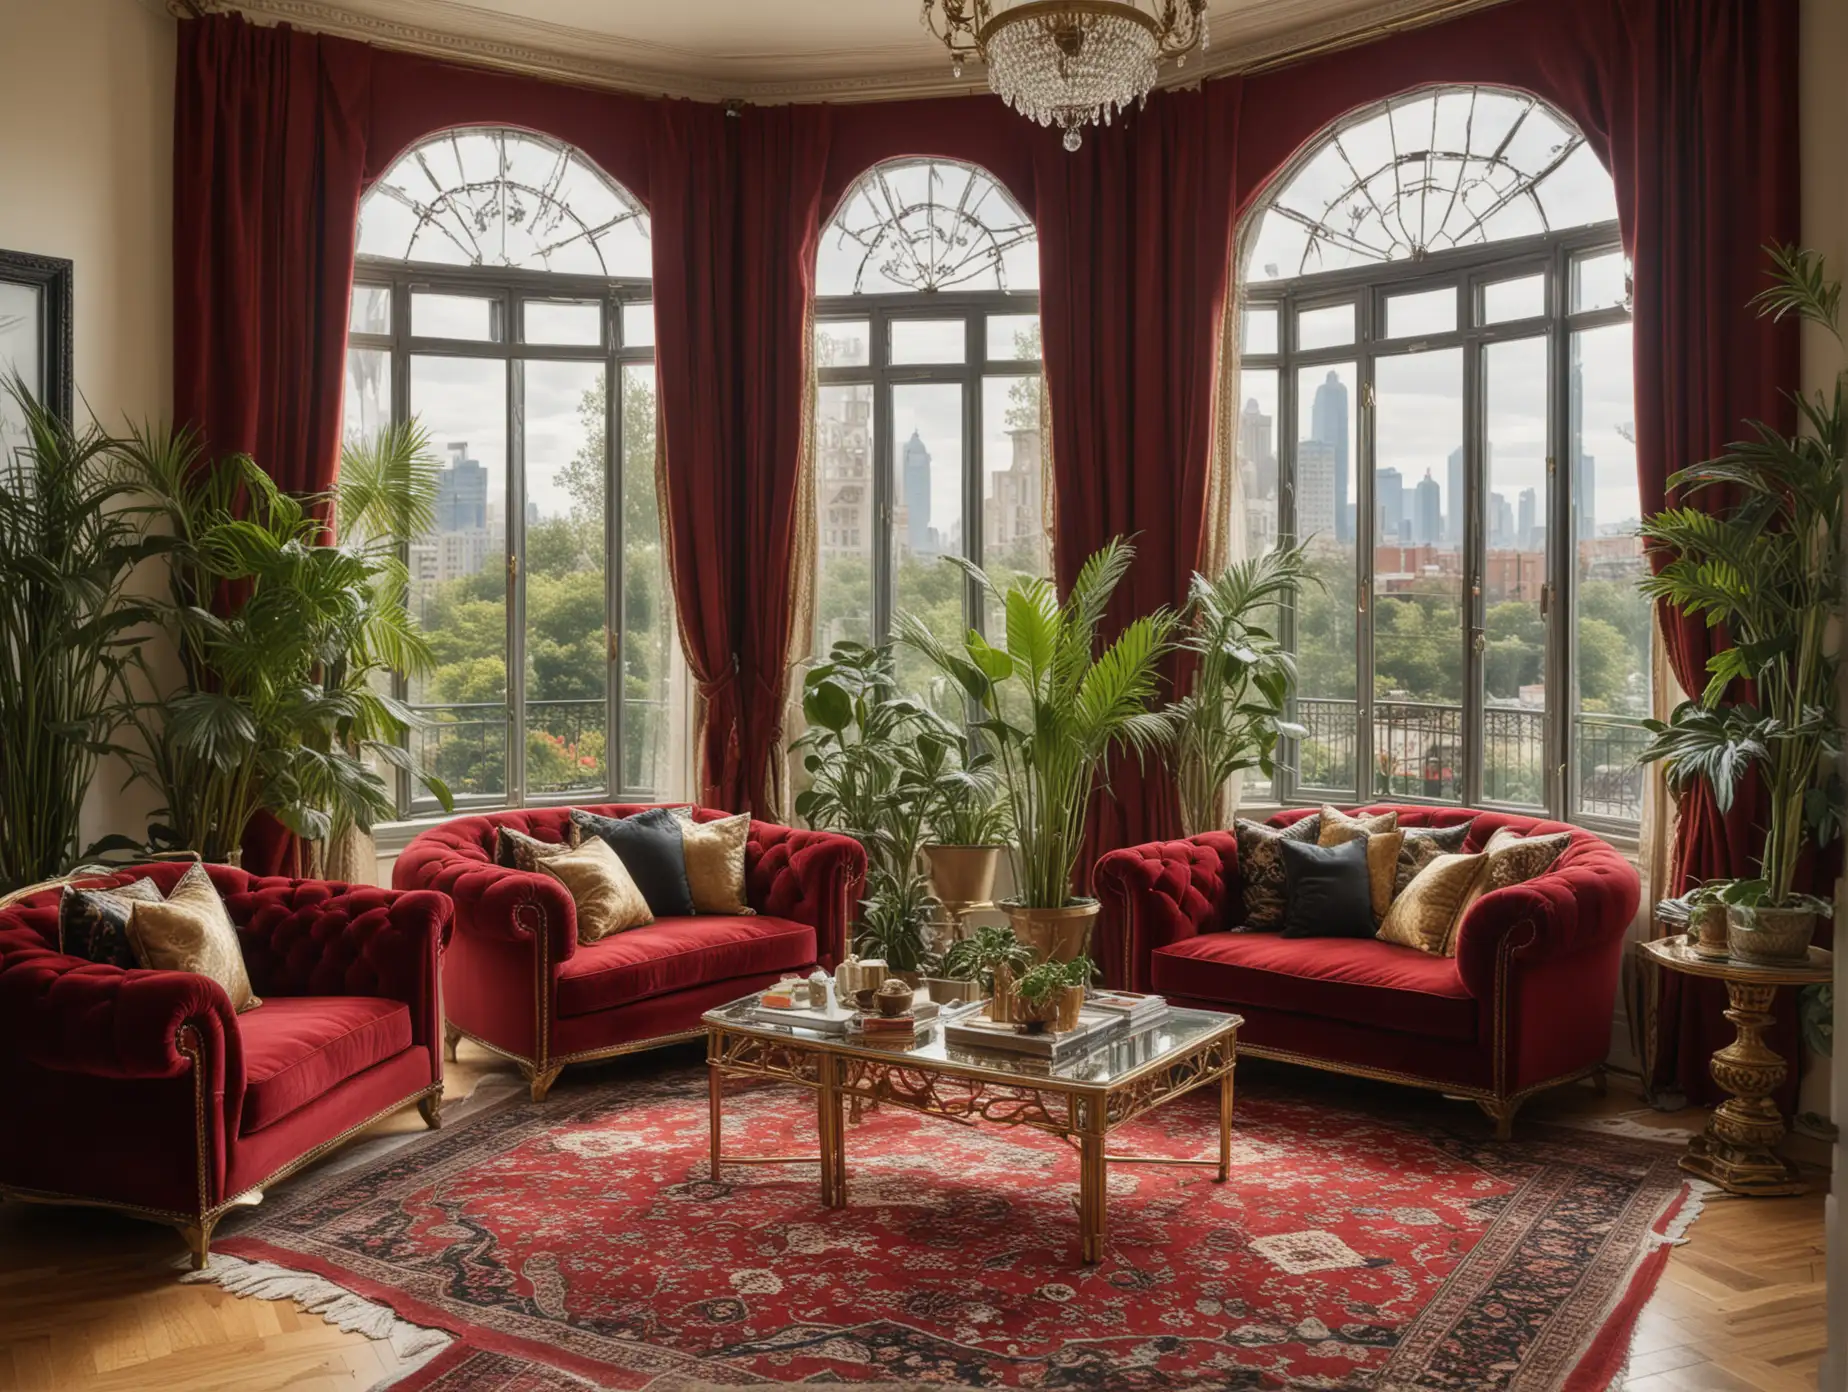 Luxurious-Art-Deco-Sitting-Area-with-Red-Velvet-Sofa-and-City-View